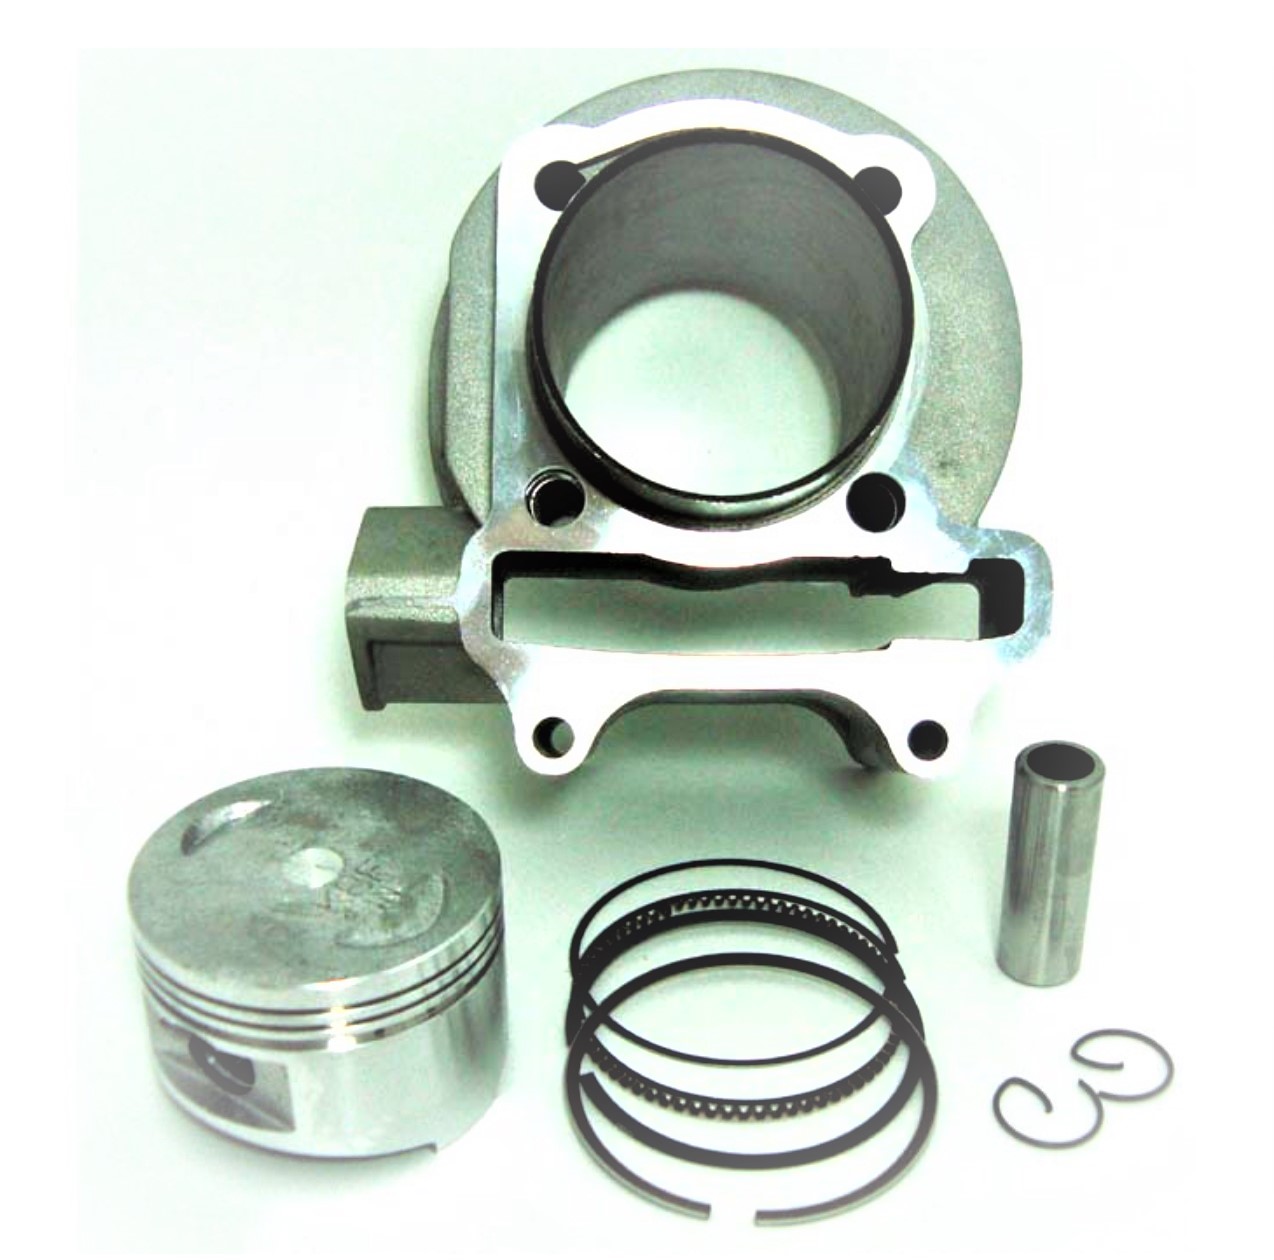 Cylinder Piston Kits 2 Stroke and 4 Stroke For 49-260cc Engines